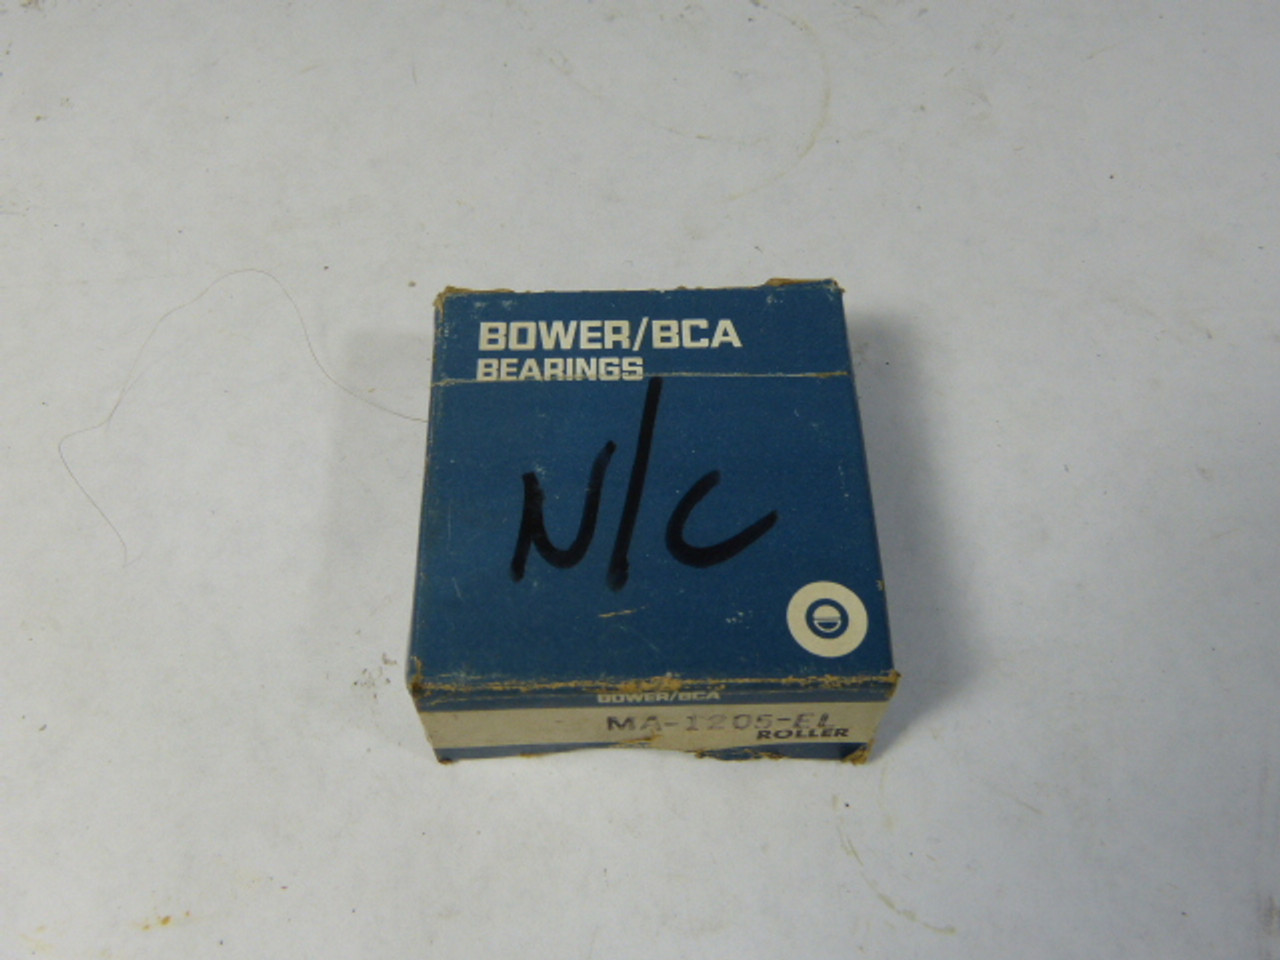 Bower MA-1205-EL Cylindrical Roller Bearing ! NEW !